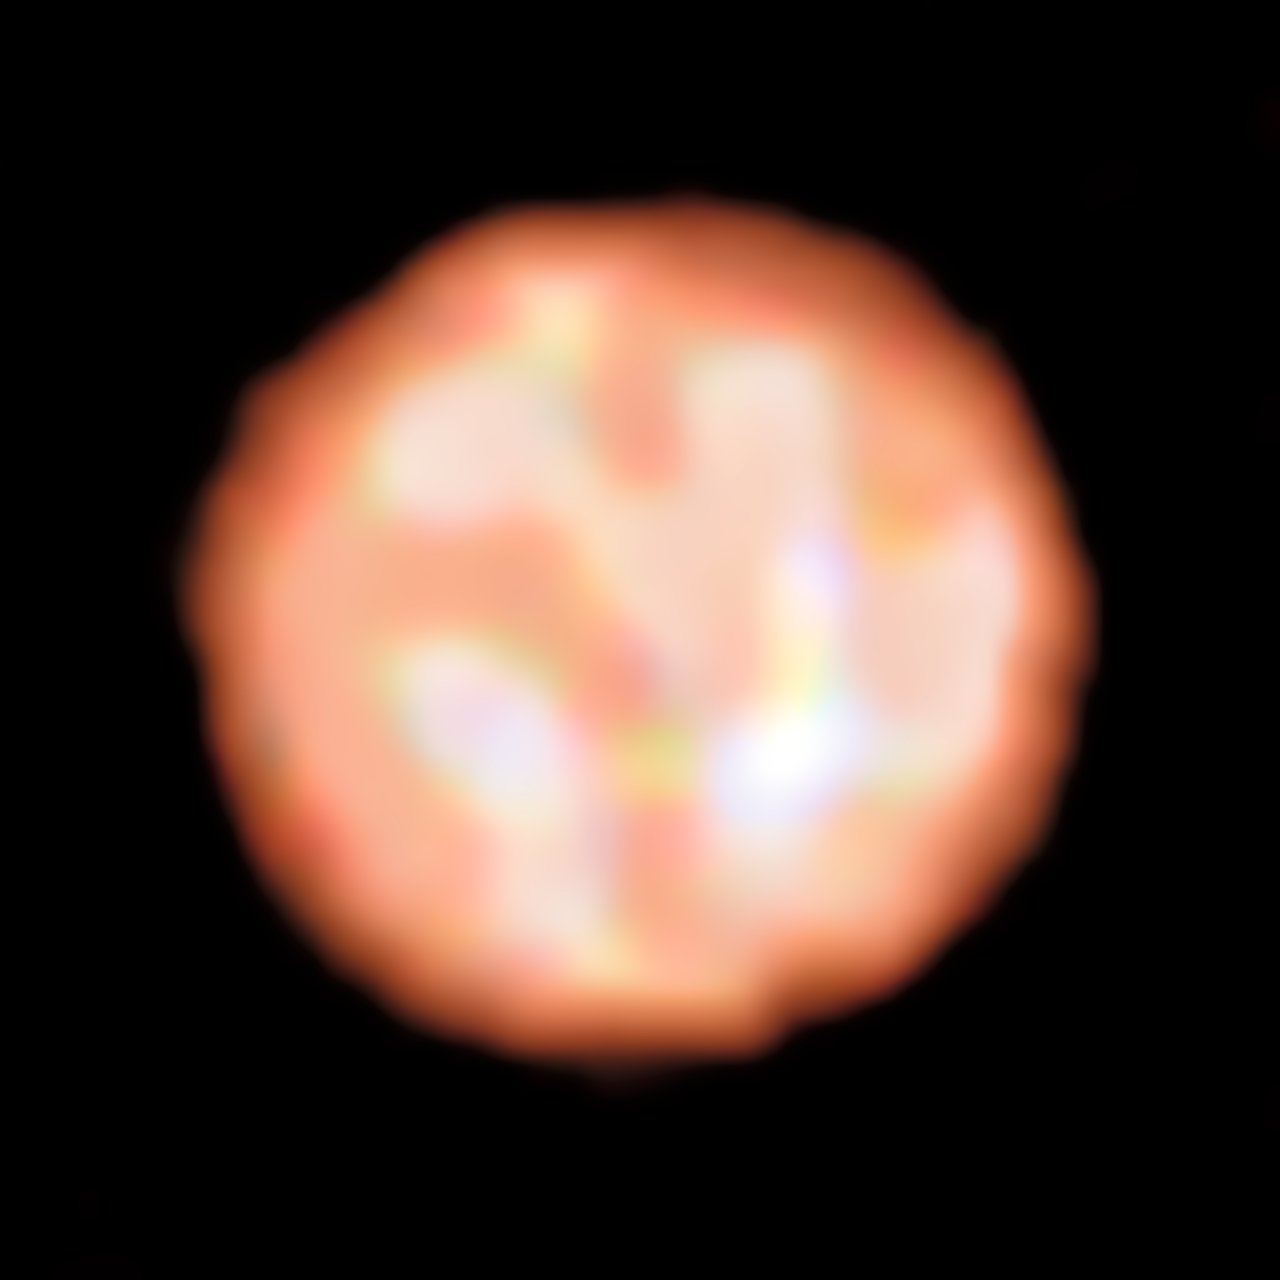 The surface of the red giant star π1 Gruis from PIONIER on the VLT